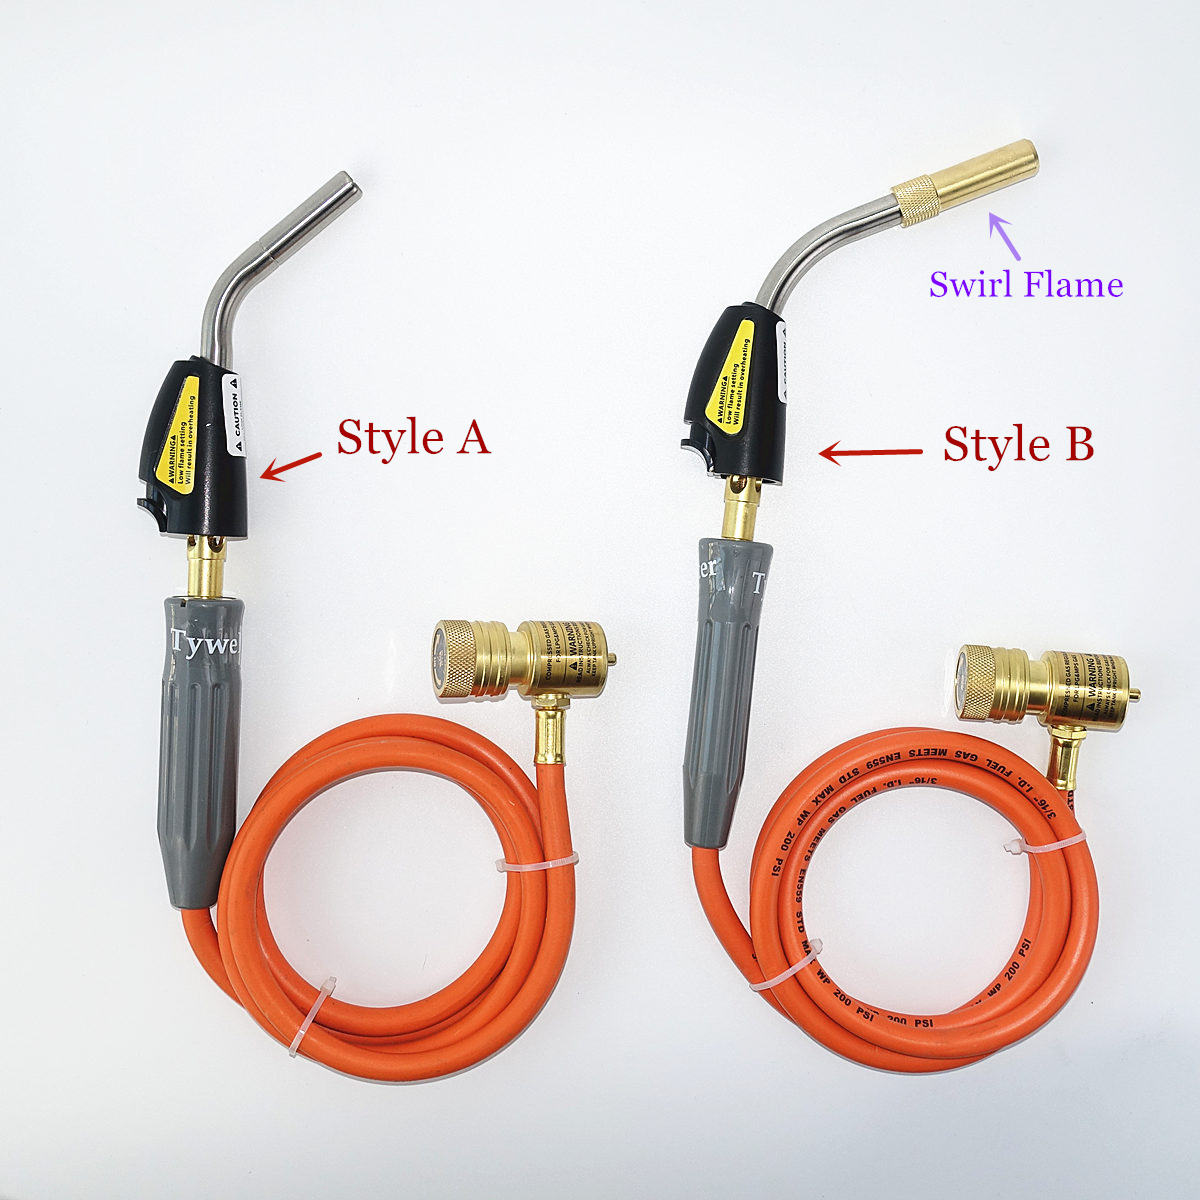 Without Hose Braze Welding Torch Self Ignition 1.5m Hose Connection Suitable for Propane MAPP Catridge Cylinder Gas Welding Torch Heat 